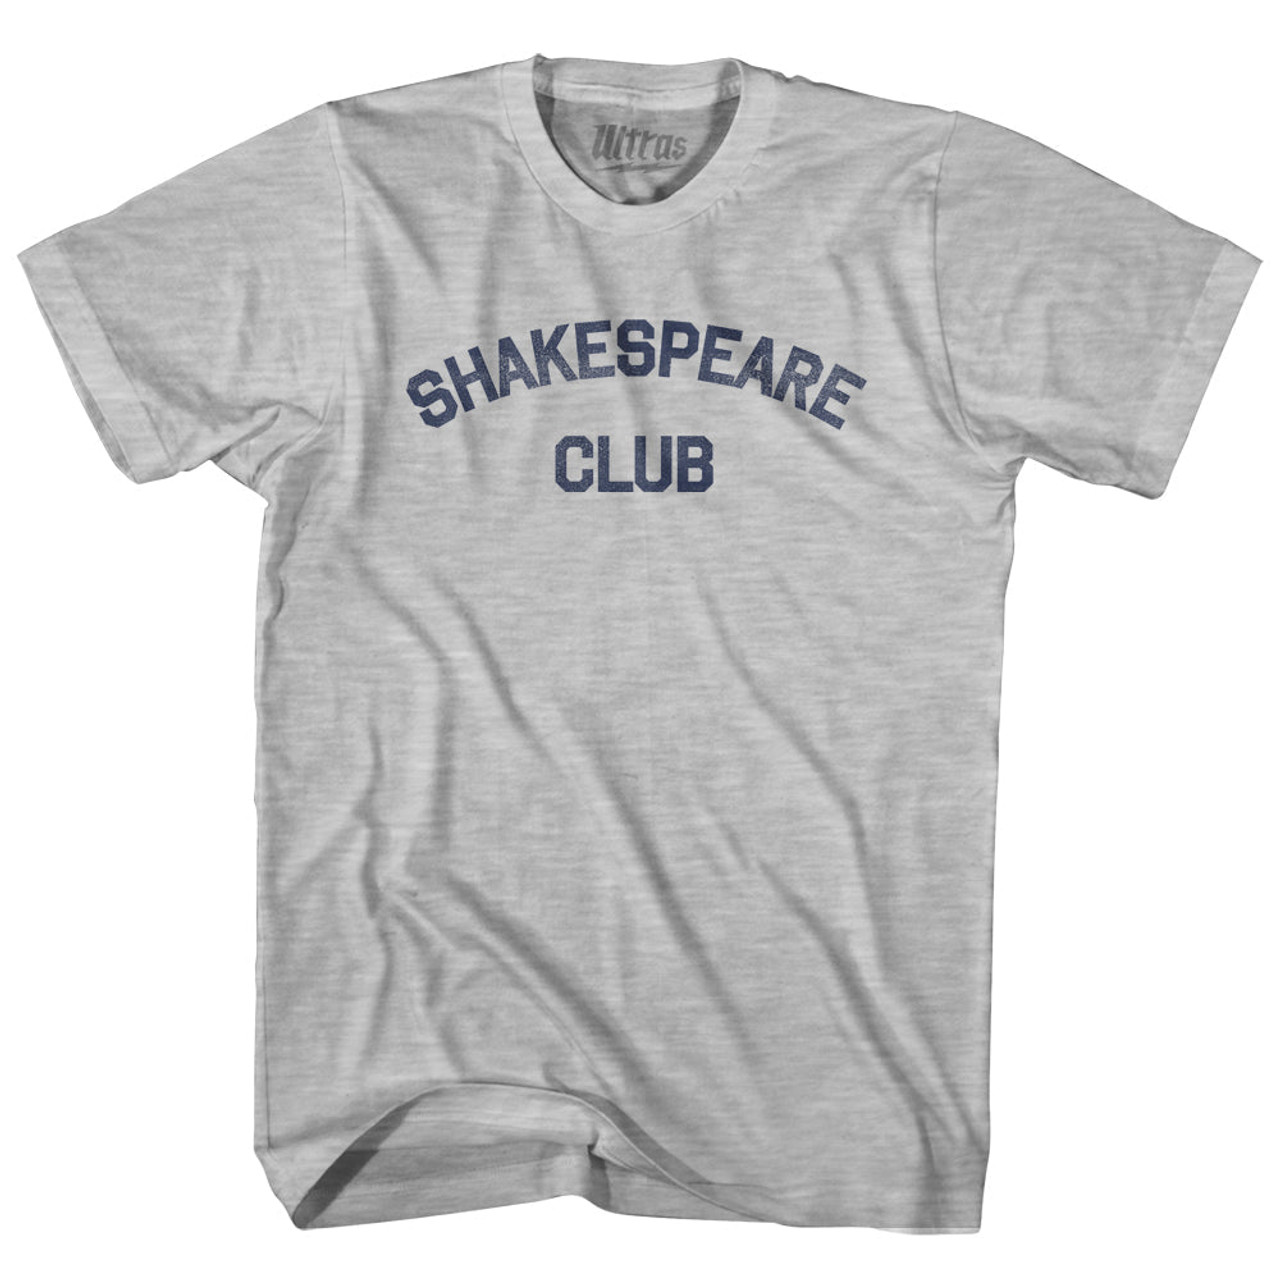 Shakespeare Club Youth Cotton T-shirt - Grey Heather